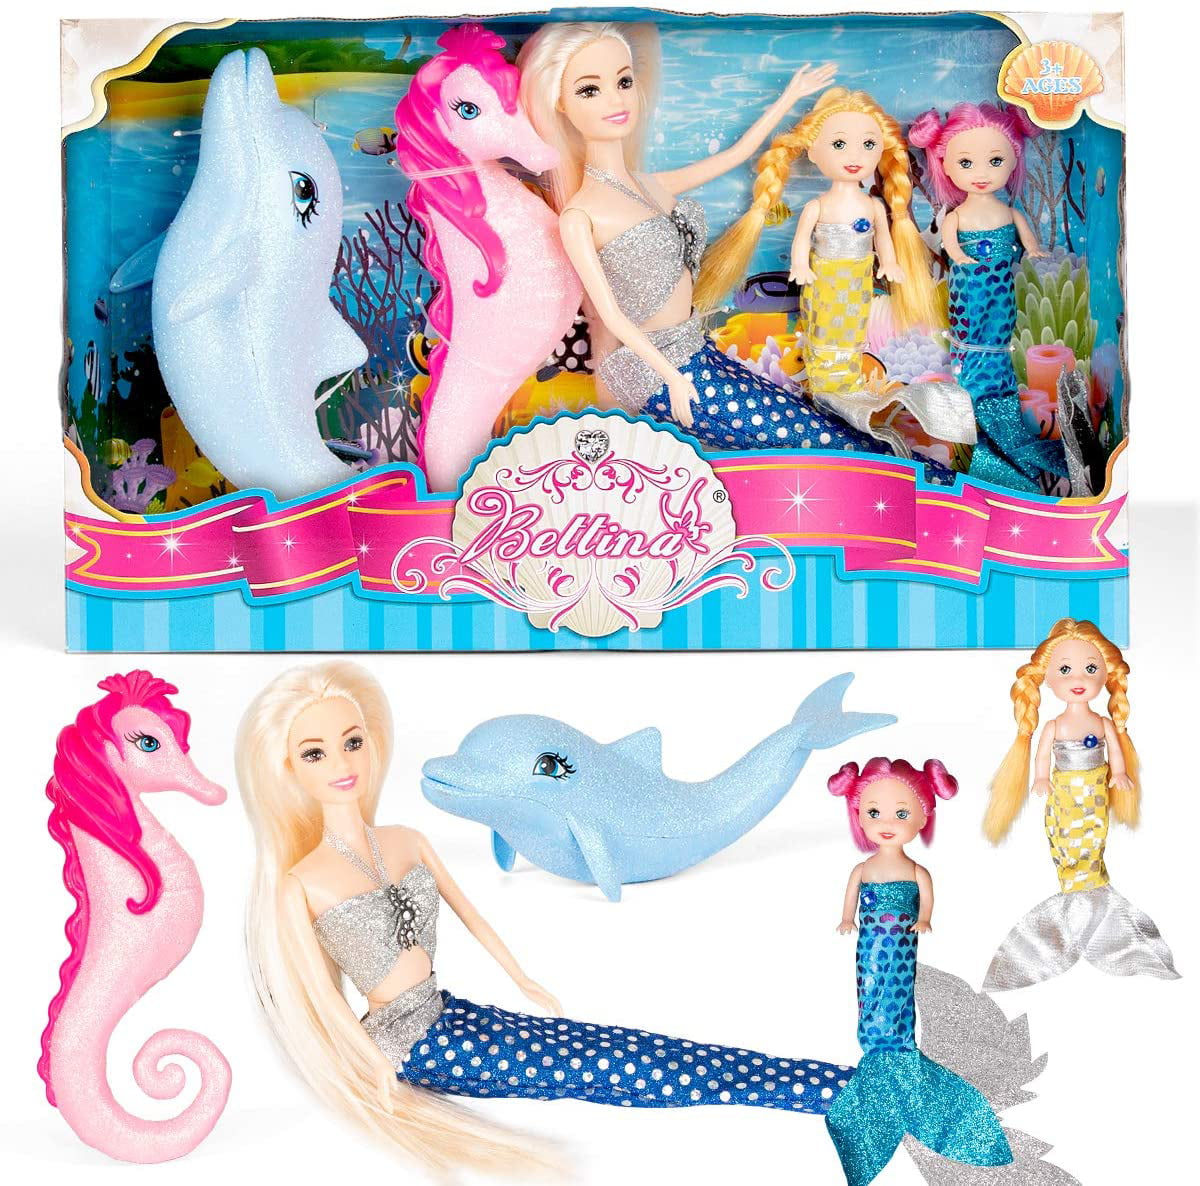 KandyToys Mermaid Princess Set of 3 Dolls with Accessories 